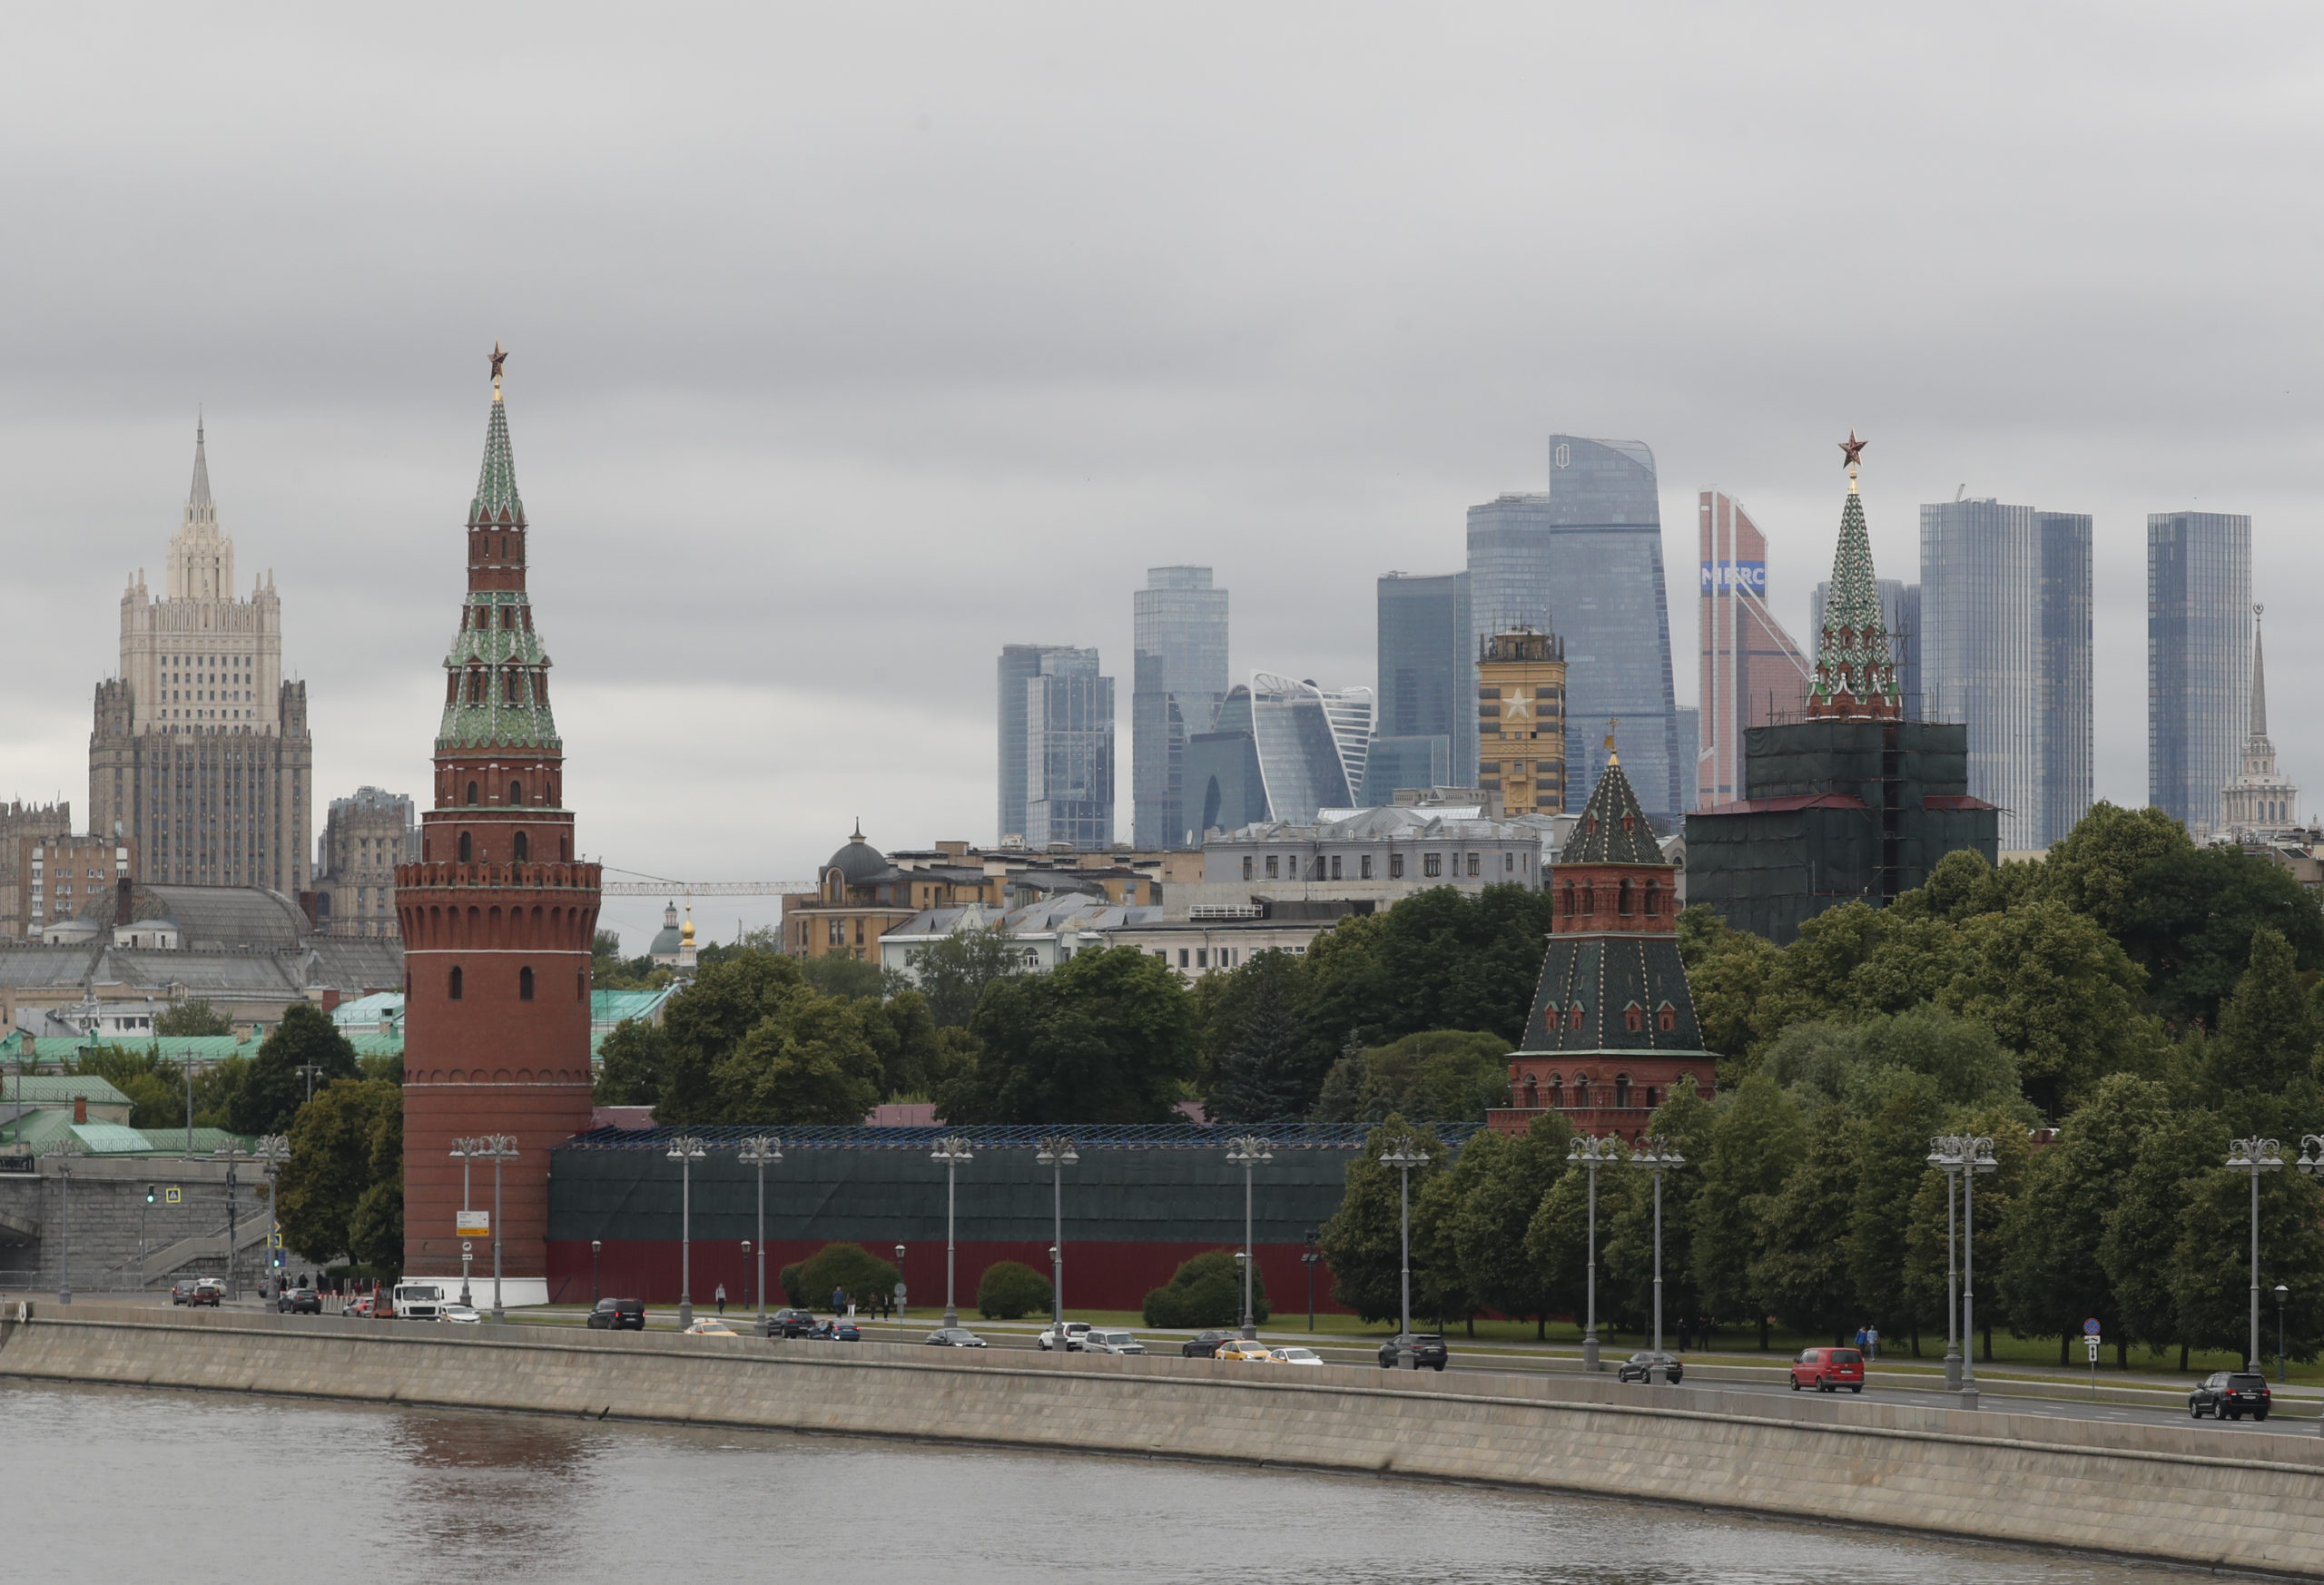 Counter-terrorism measures enforced in Moscow